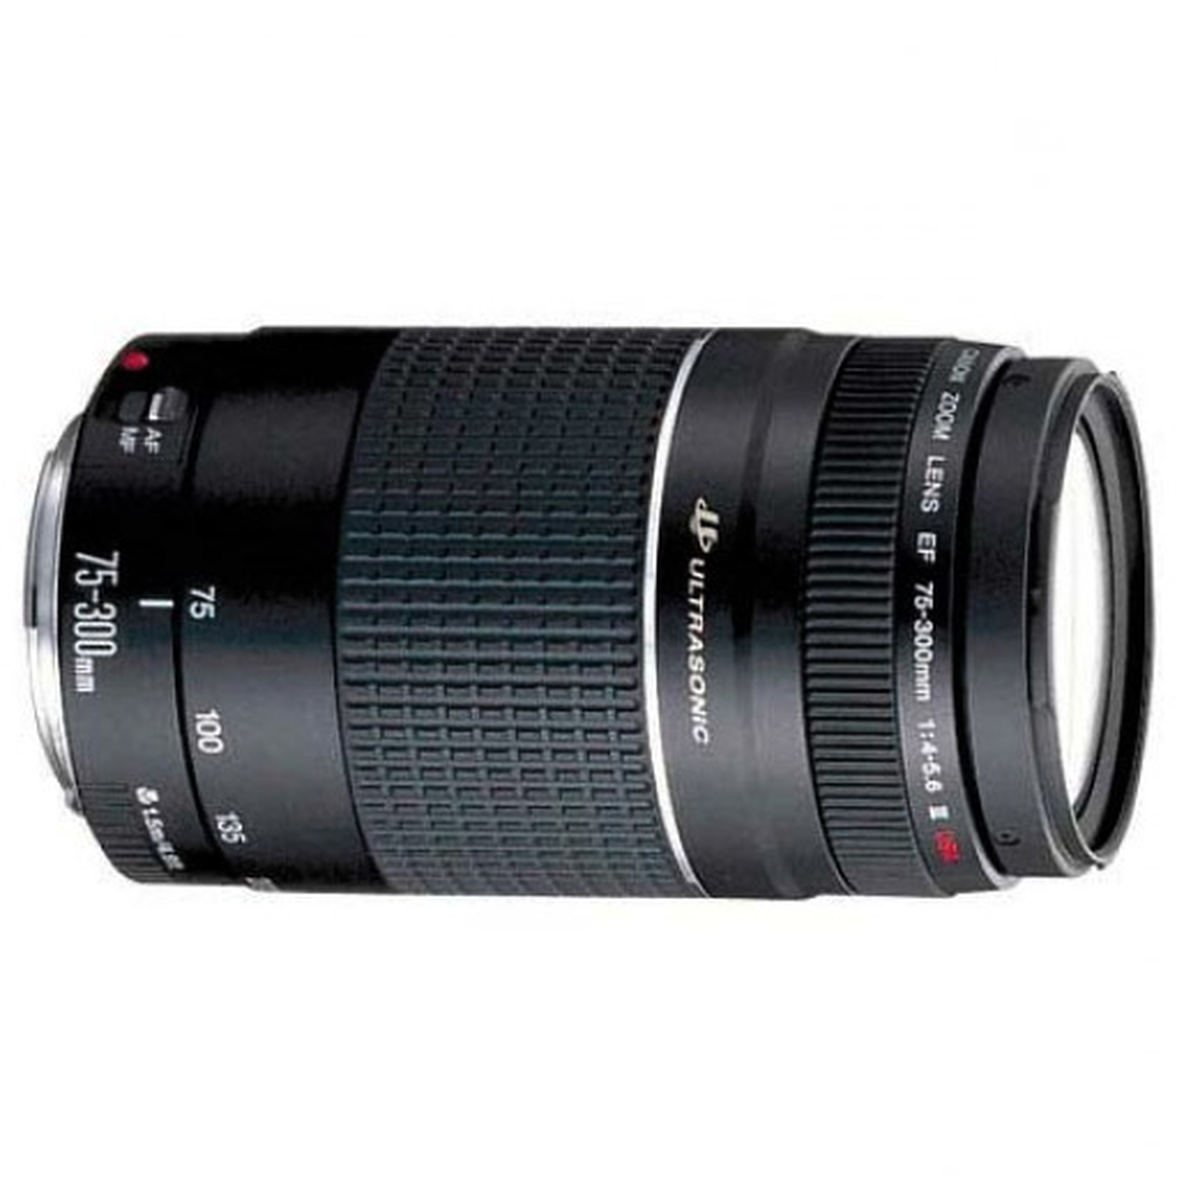 Canon EF 75-300mm f/4-5.6 III USM : Specifications and Opinions | JuzaPhoto